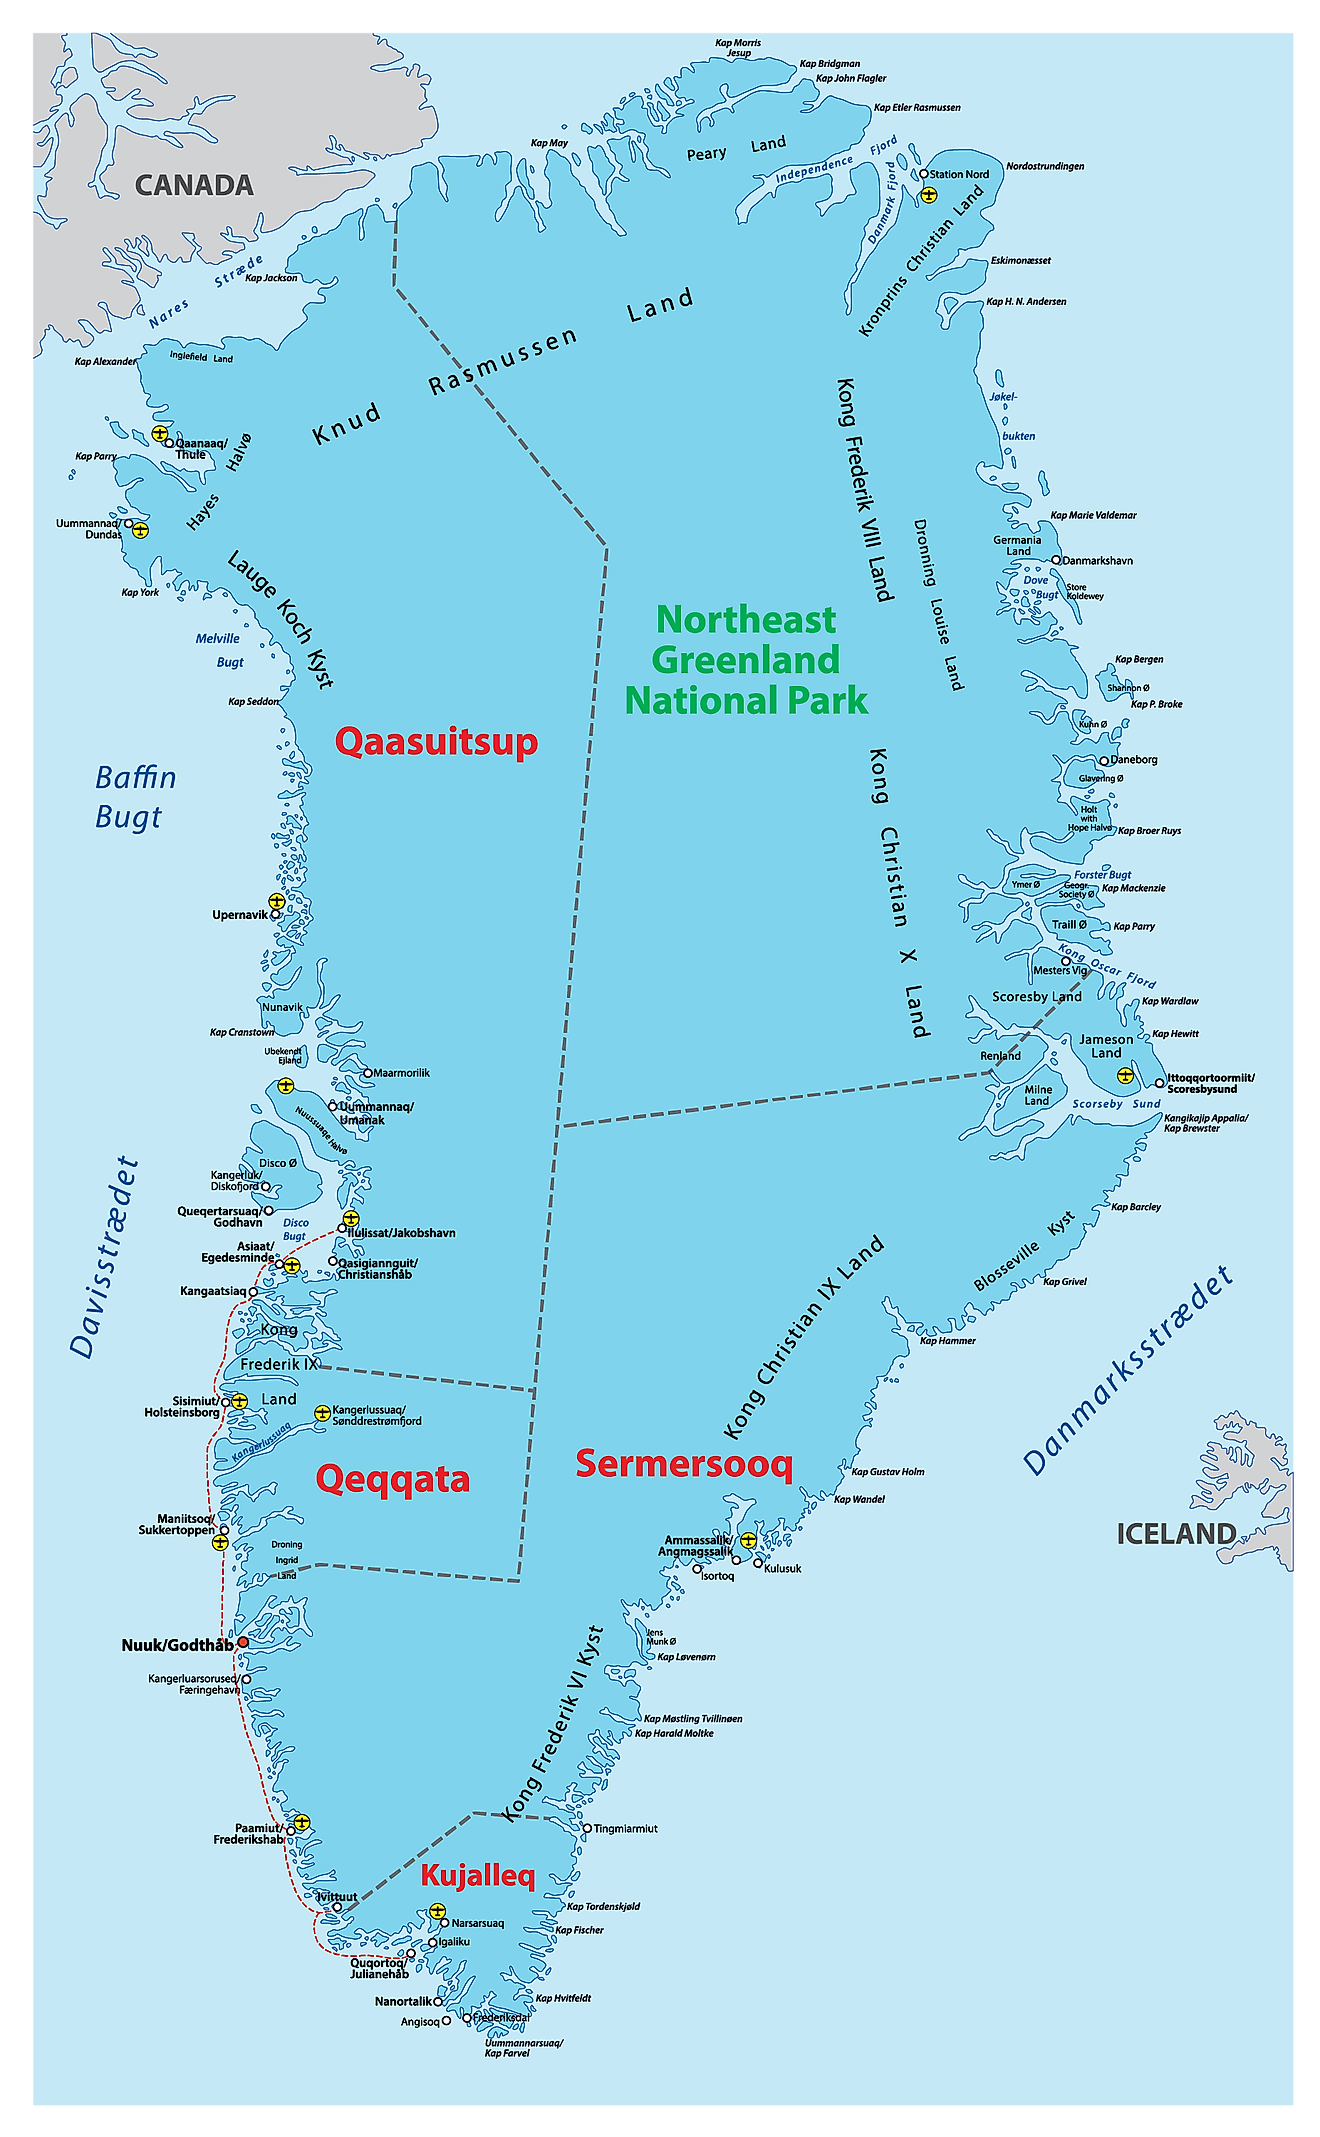 Political Map of Greenland showing its 5 municipalities and the capital city of Nuuk.